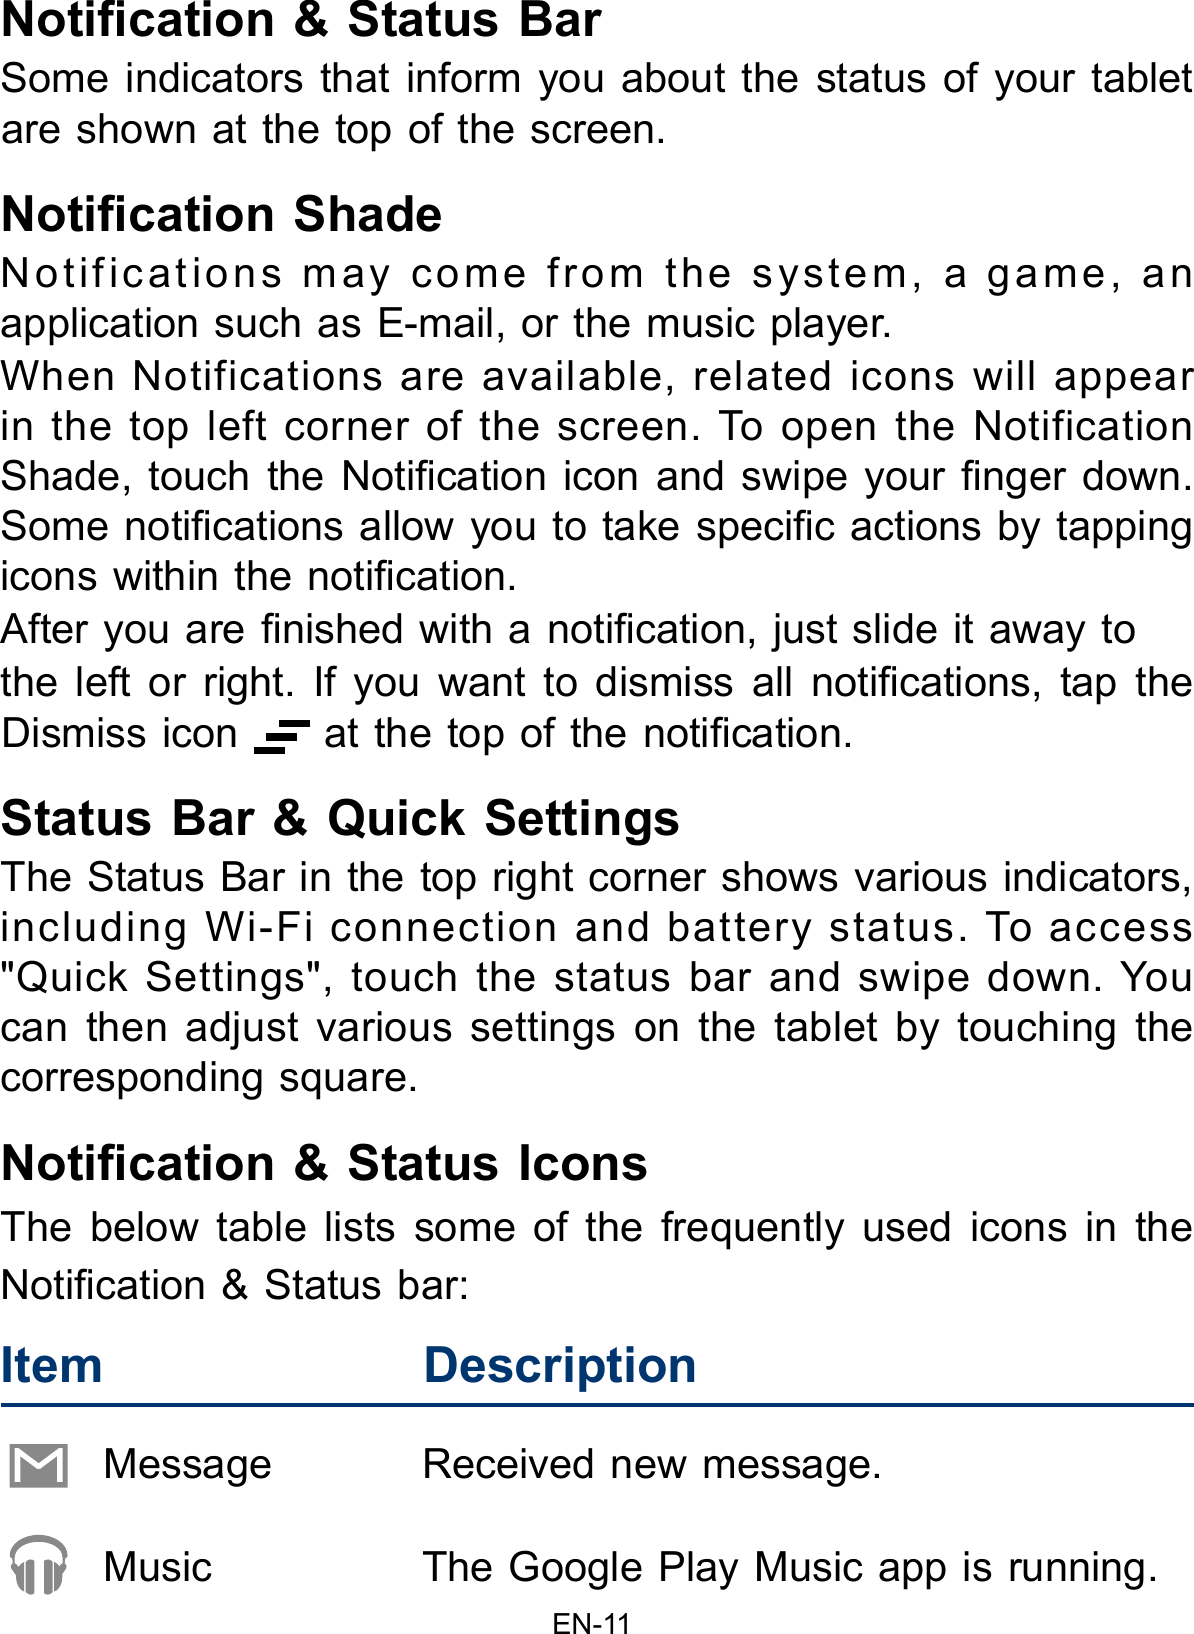 EN-11Notication &amp; Status BarSome indicators that inform you about the status of your tablet are shown at the top of the screen.Notication ShadeNotifications may come from the system, a game, an application such as E-mail, or the music player.When Notifications are available, related icons will appear in the top left corner of the screen. To open the Notification Shade, touch  the Notication icon  and swipe your  nger  down. Some notications allow you to take specic actions by tapping icons within the notication.After you are nished with a notication, just slide it away to the  left  or  right.  If  you  want  to  dismiss  all  notications,  tap  the Dismiss icon   at the top of the notication.Status Bar &amp; Quick SettingsThe Status Bar in the top right corner shows various indicators, including Wi-Fi connection and battery status. To access &quot;Quick Settings&quot;, touch the status bar and swipe down. You can then adjust various settings on the tablet by touching the corresponding square.Notication &amp; Status IconsThe below table lists some of the frequently used icons in the Notication &amp; Status bar:Message  Received new message.Music  The Google Play Music app is running.Item Description